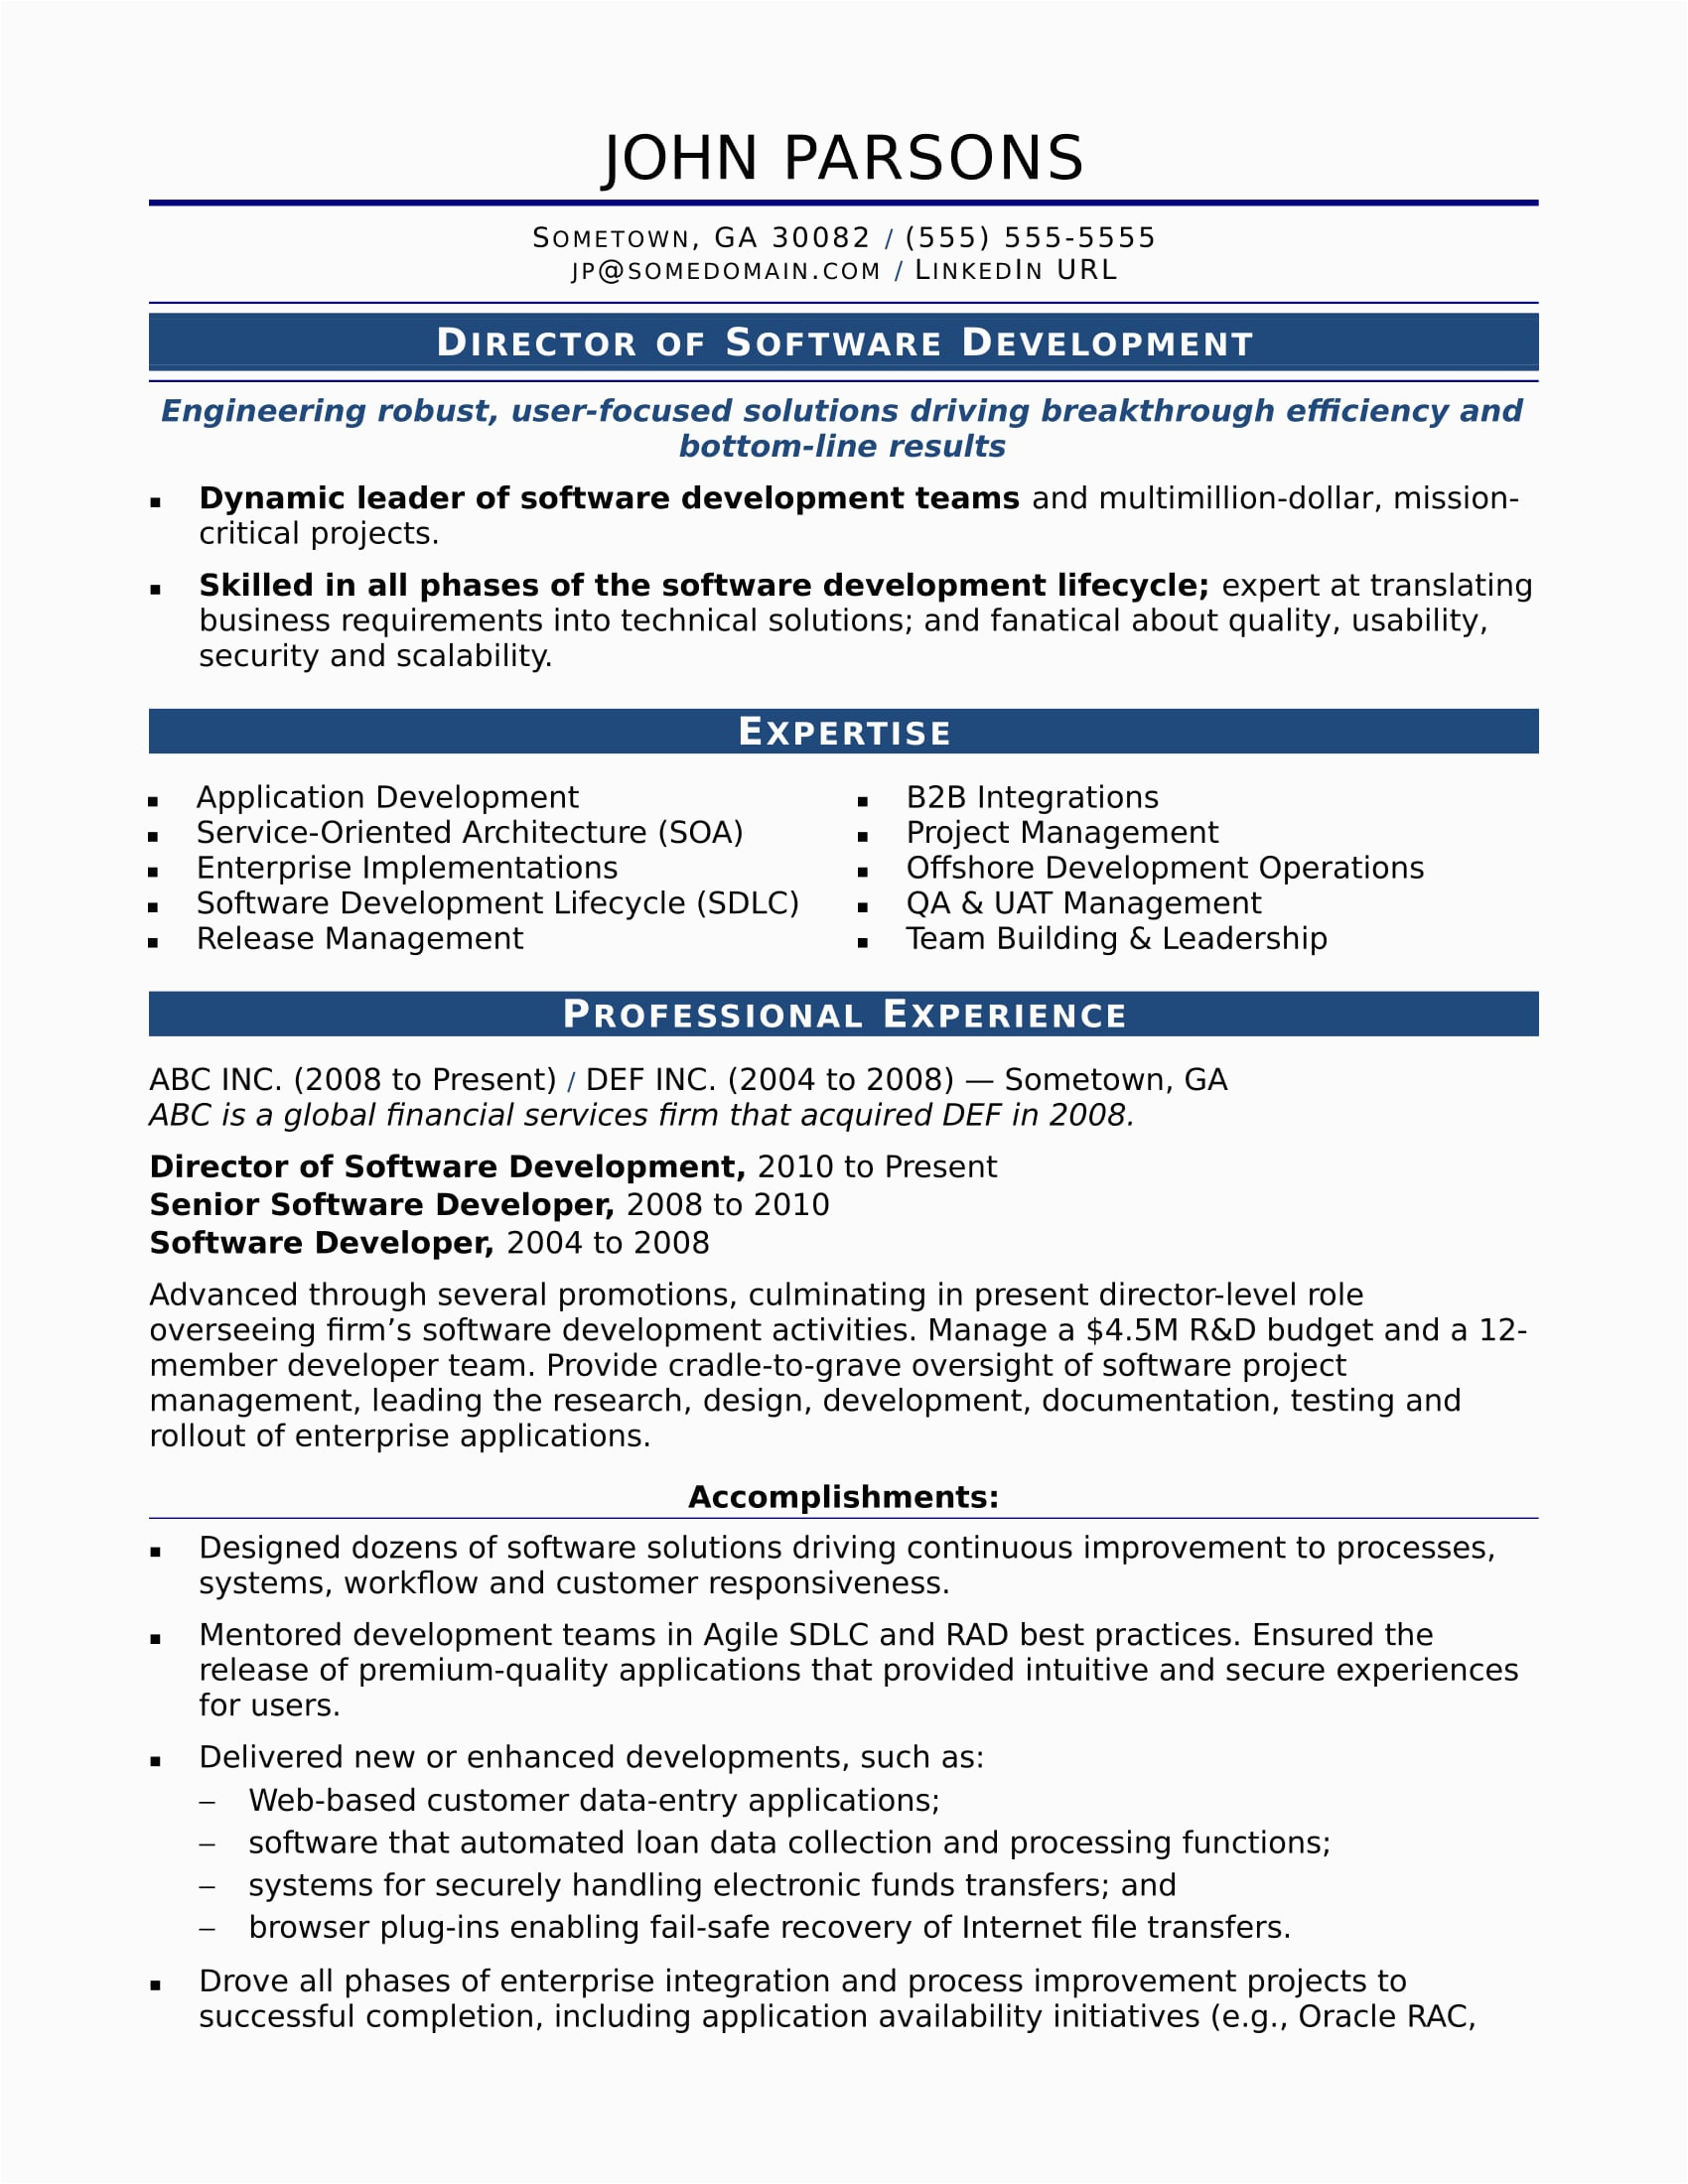 Sample Resume Objectives for Experienced It Professionals Sample Resume for An Experienced It Developer